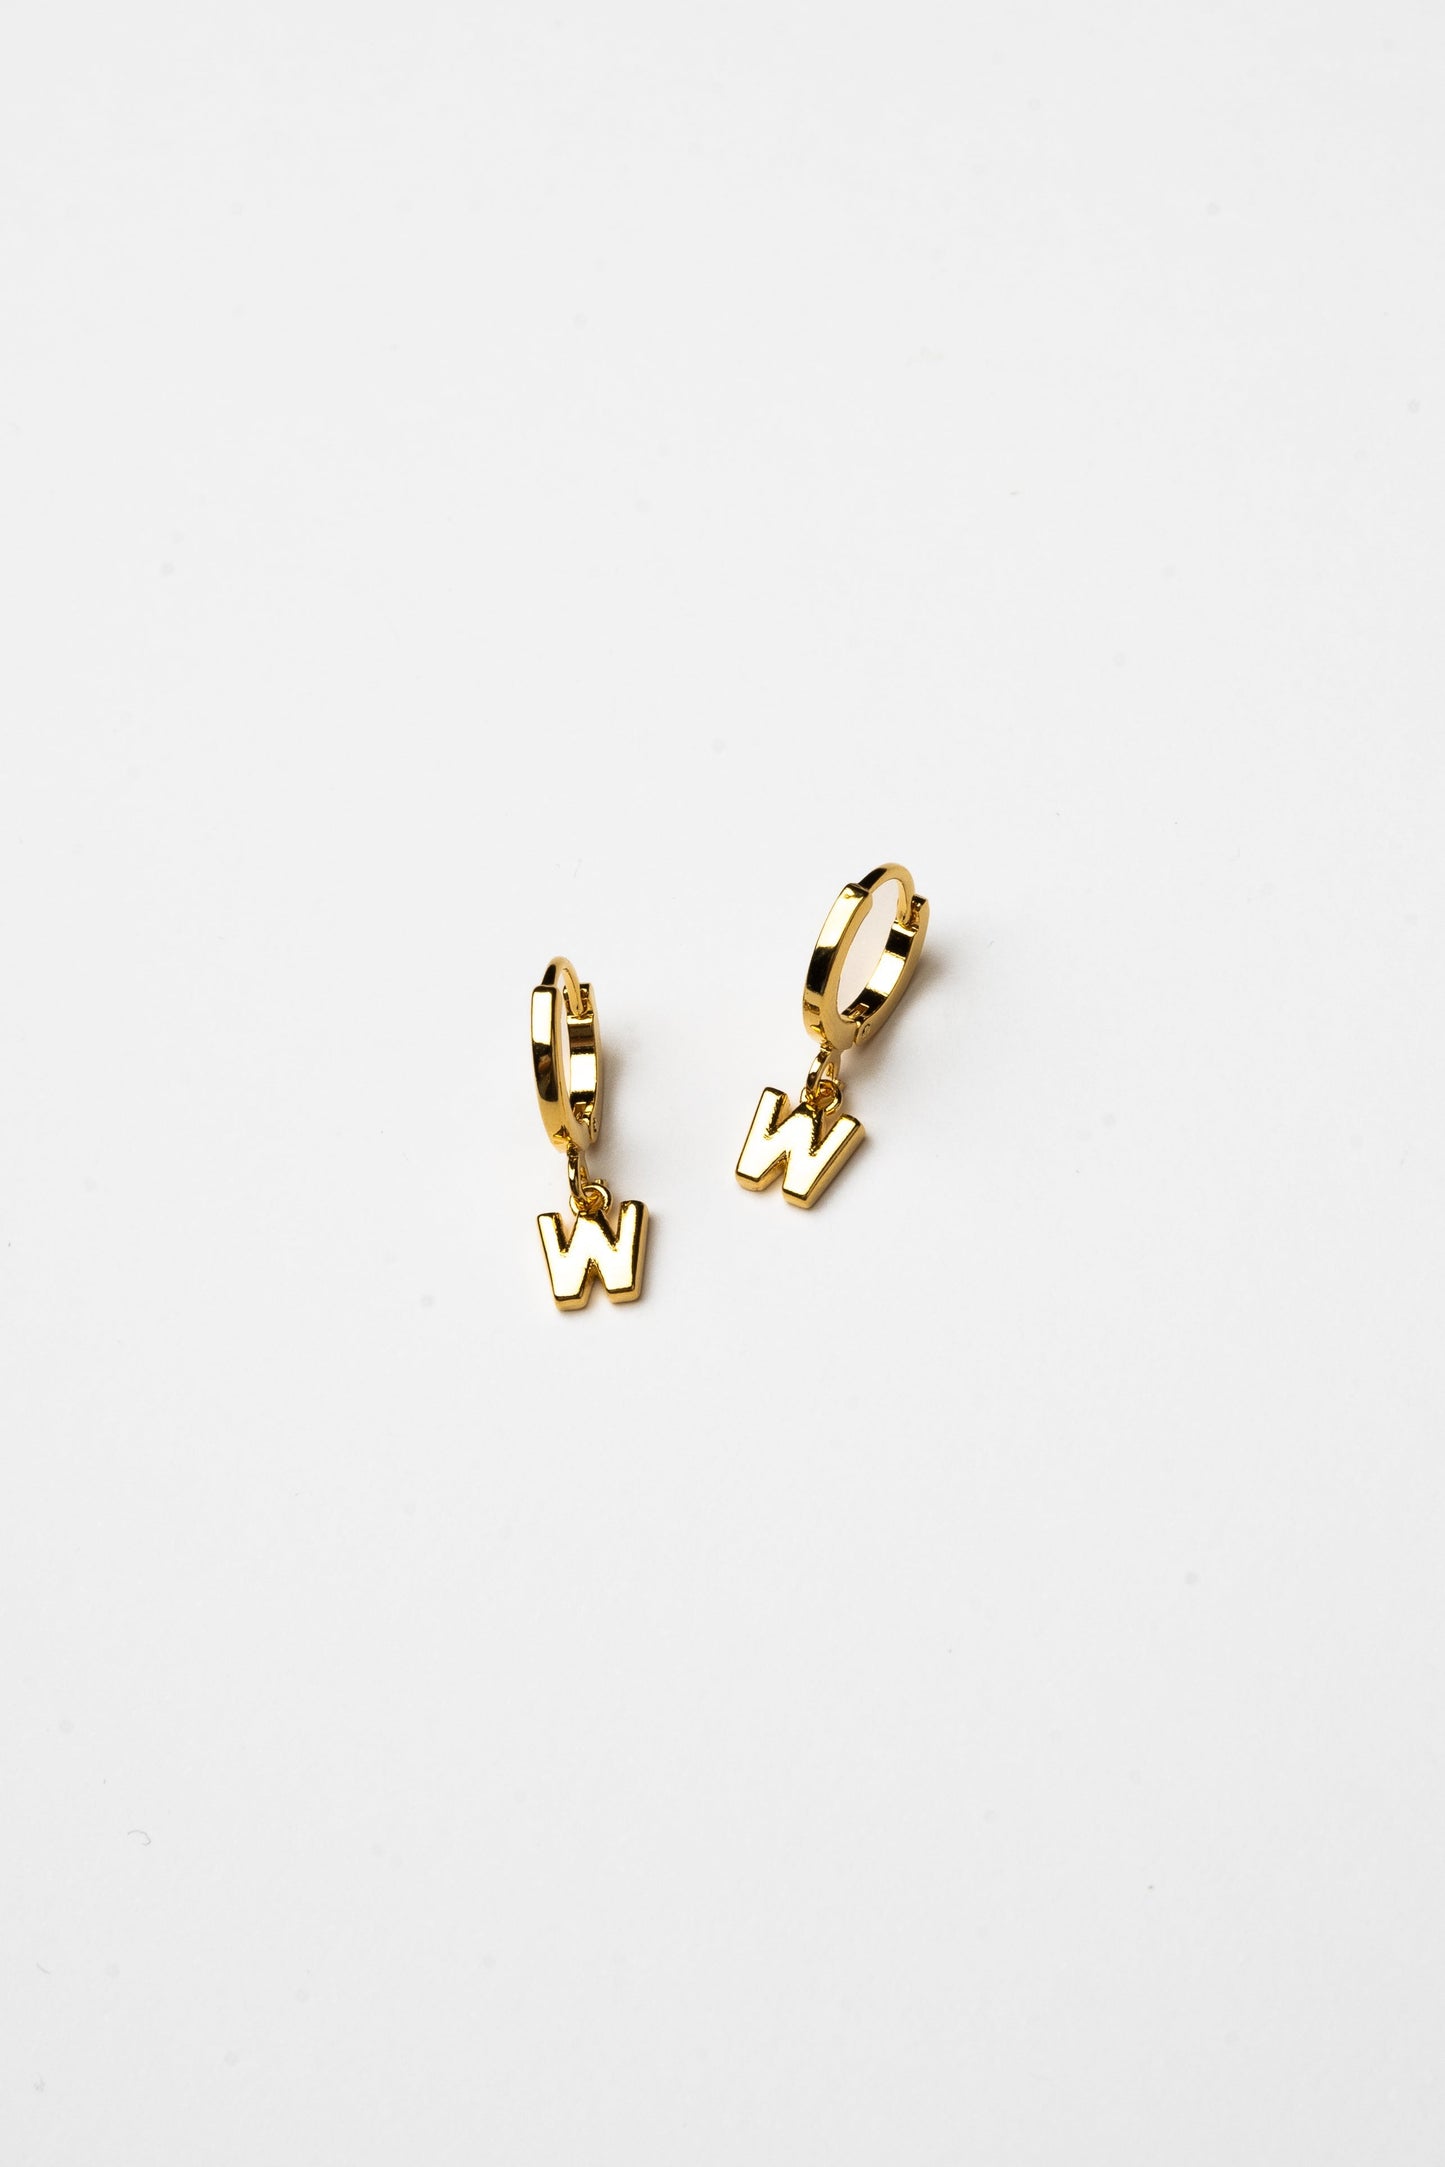 Cove Initial Letter Huggie Earrings WOMEN'S EARINGS Cove Accessories W 18k Gold Plated 